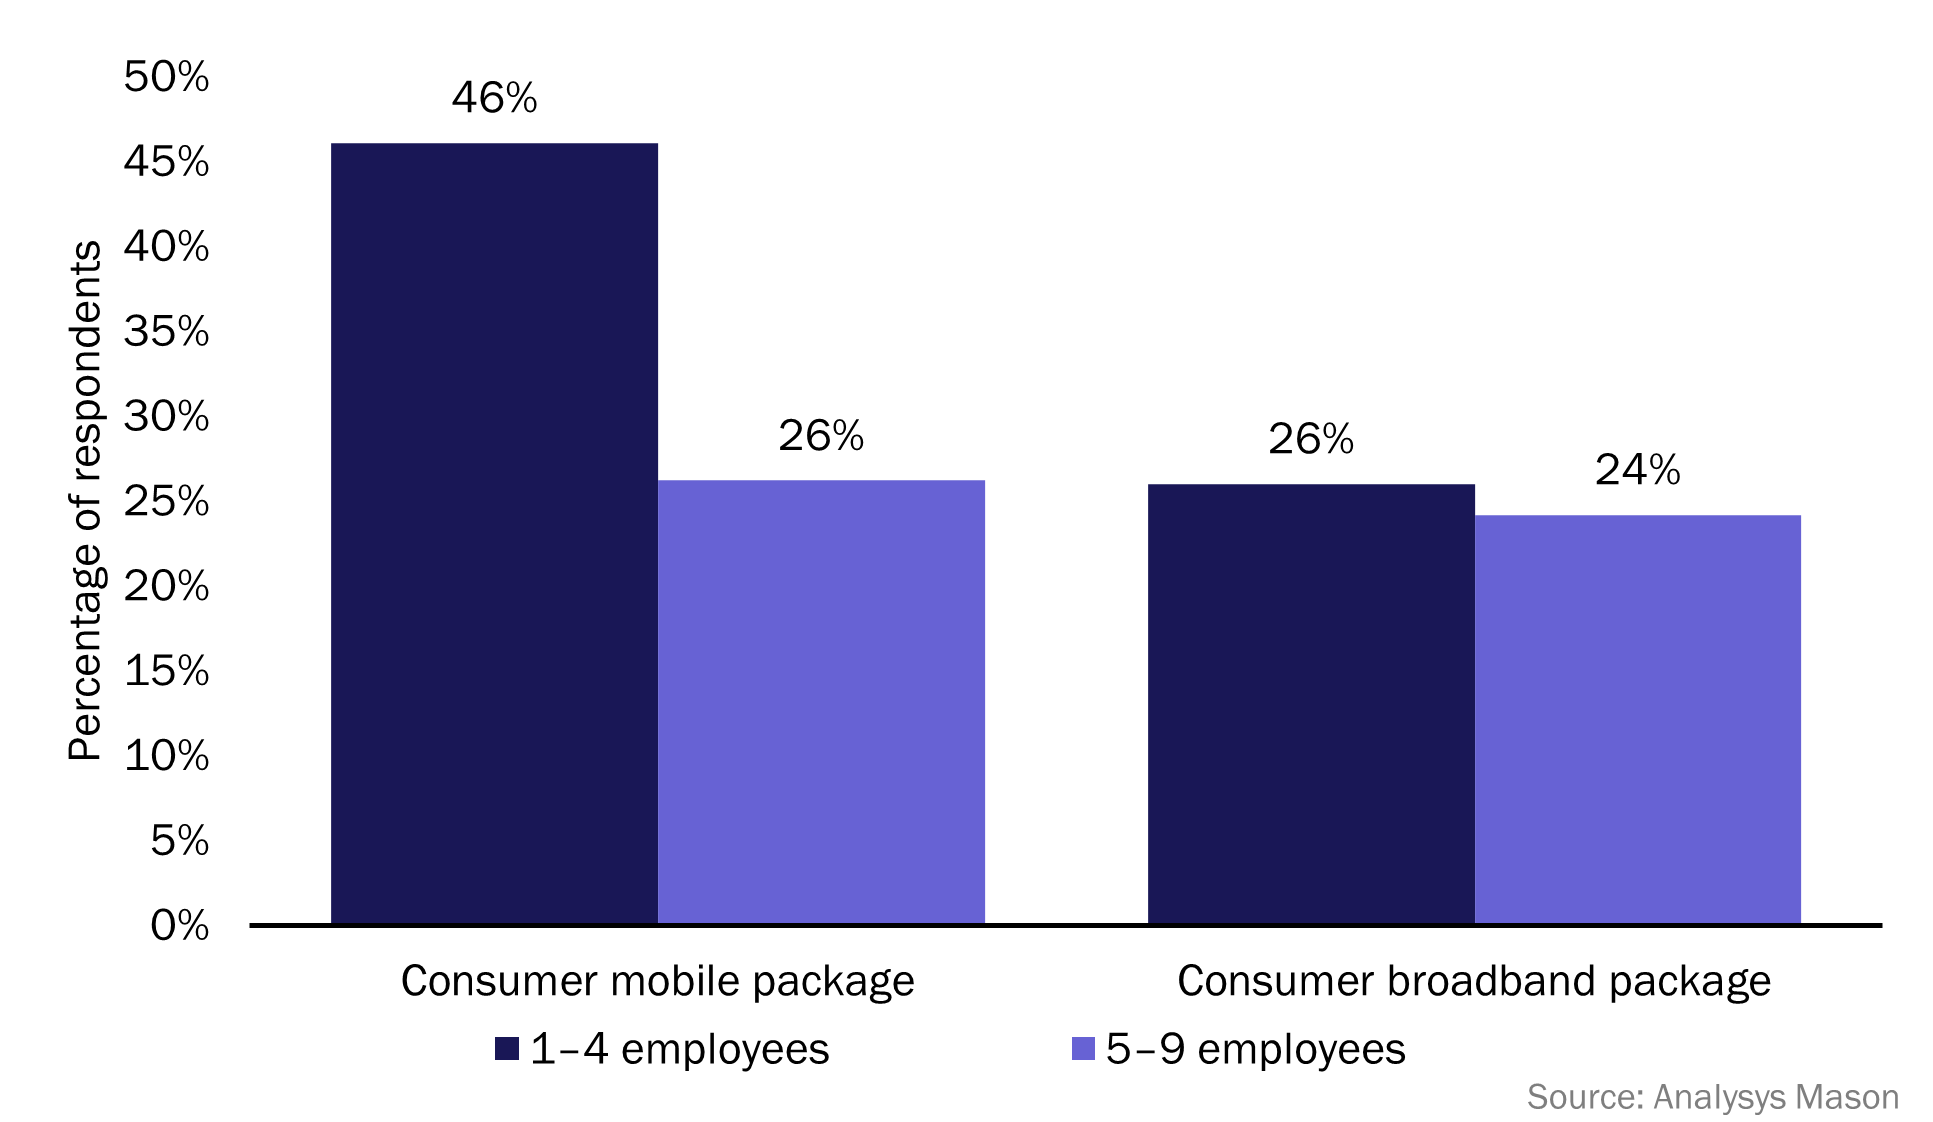 Figure 1: Percentage of very small businesses taking consumer packages, by business size, Germany, Singapore, UK and USA, 2021